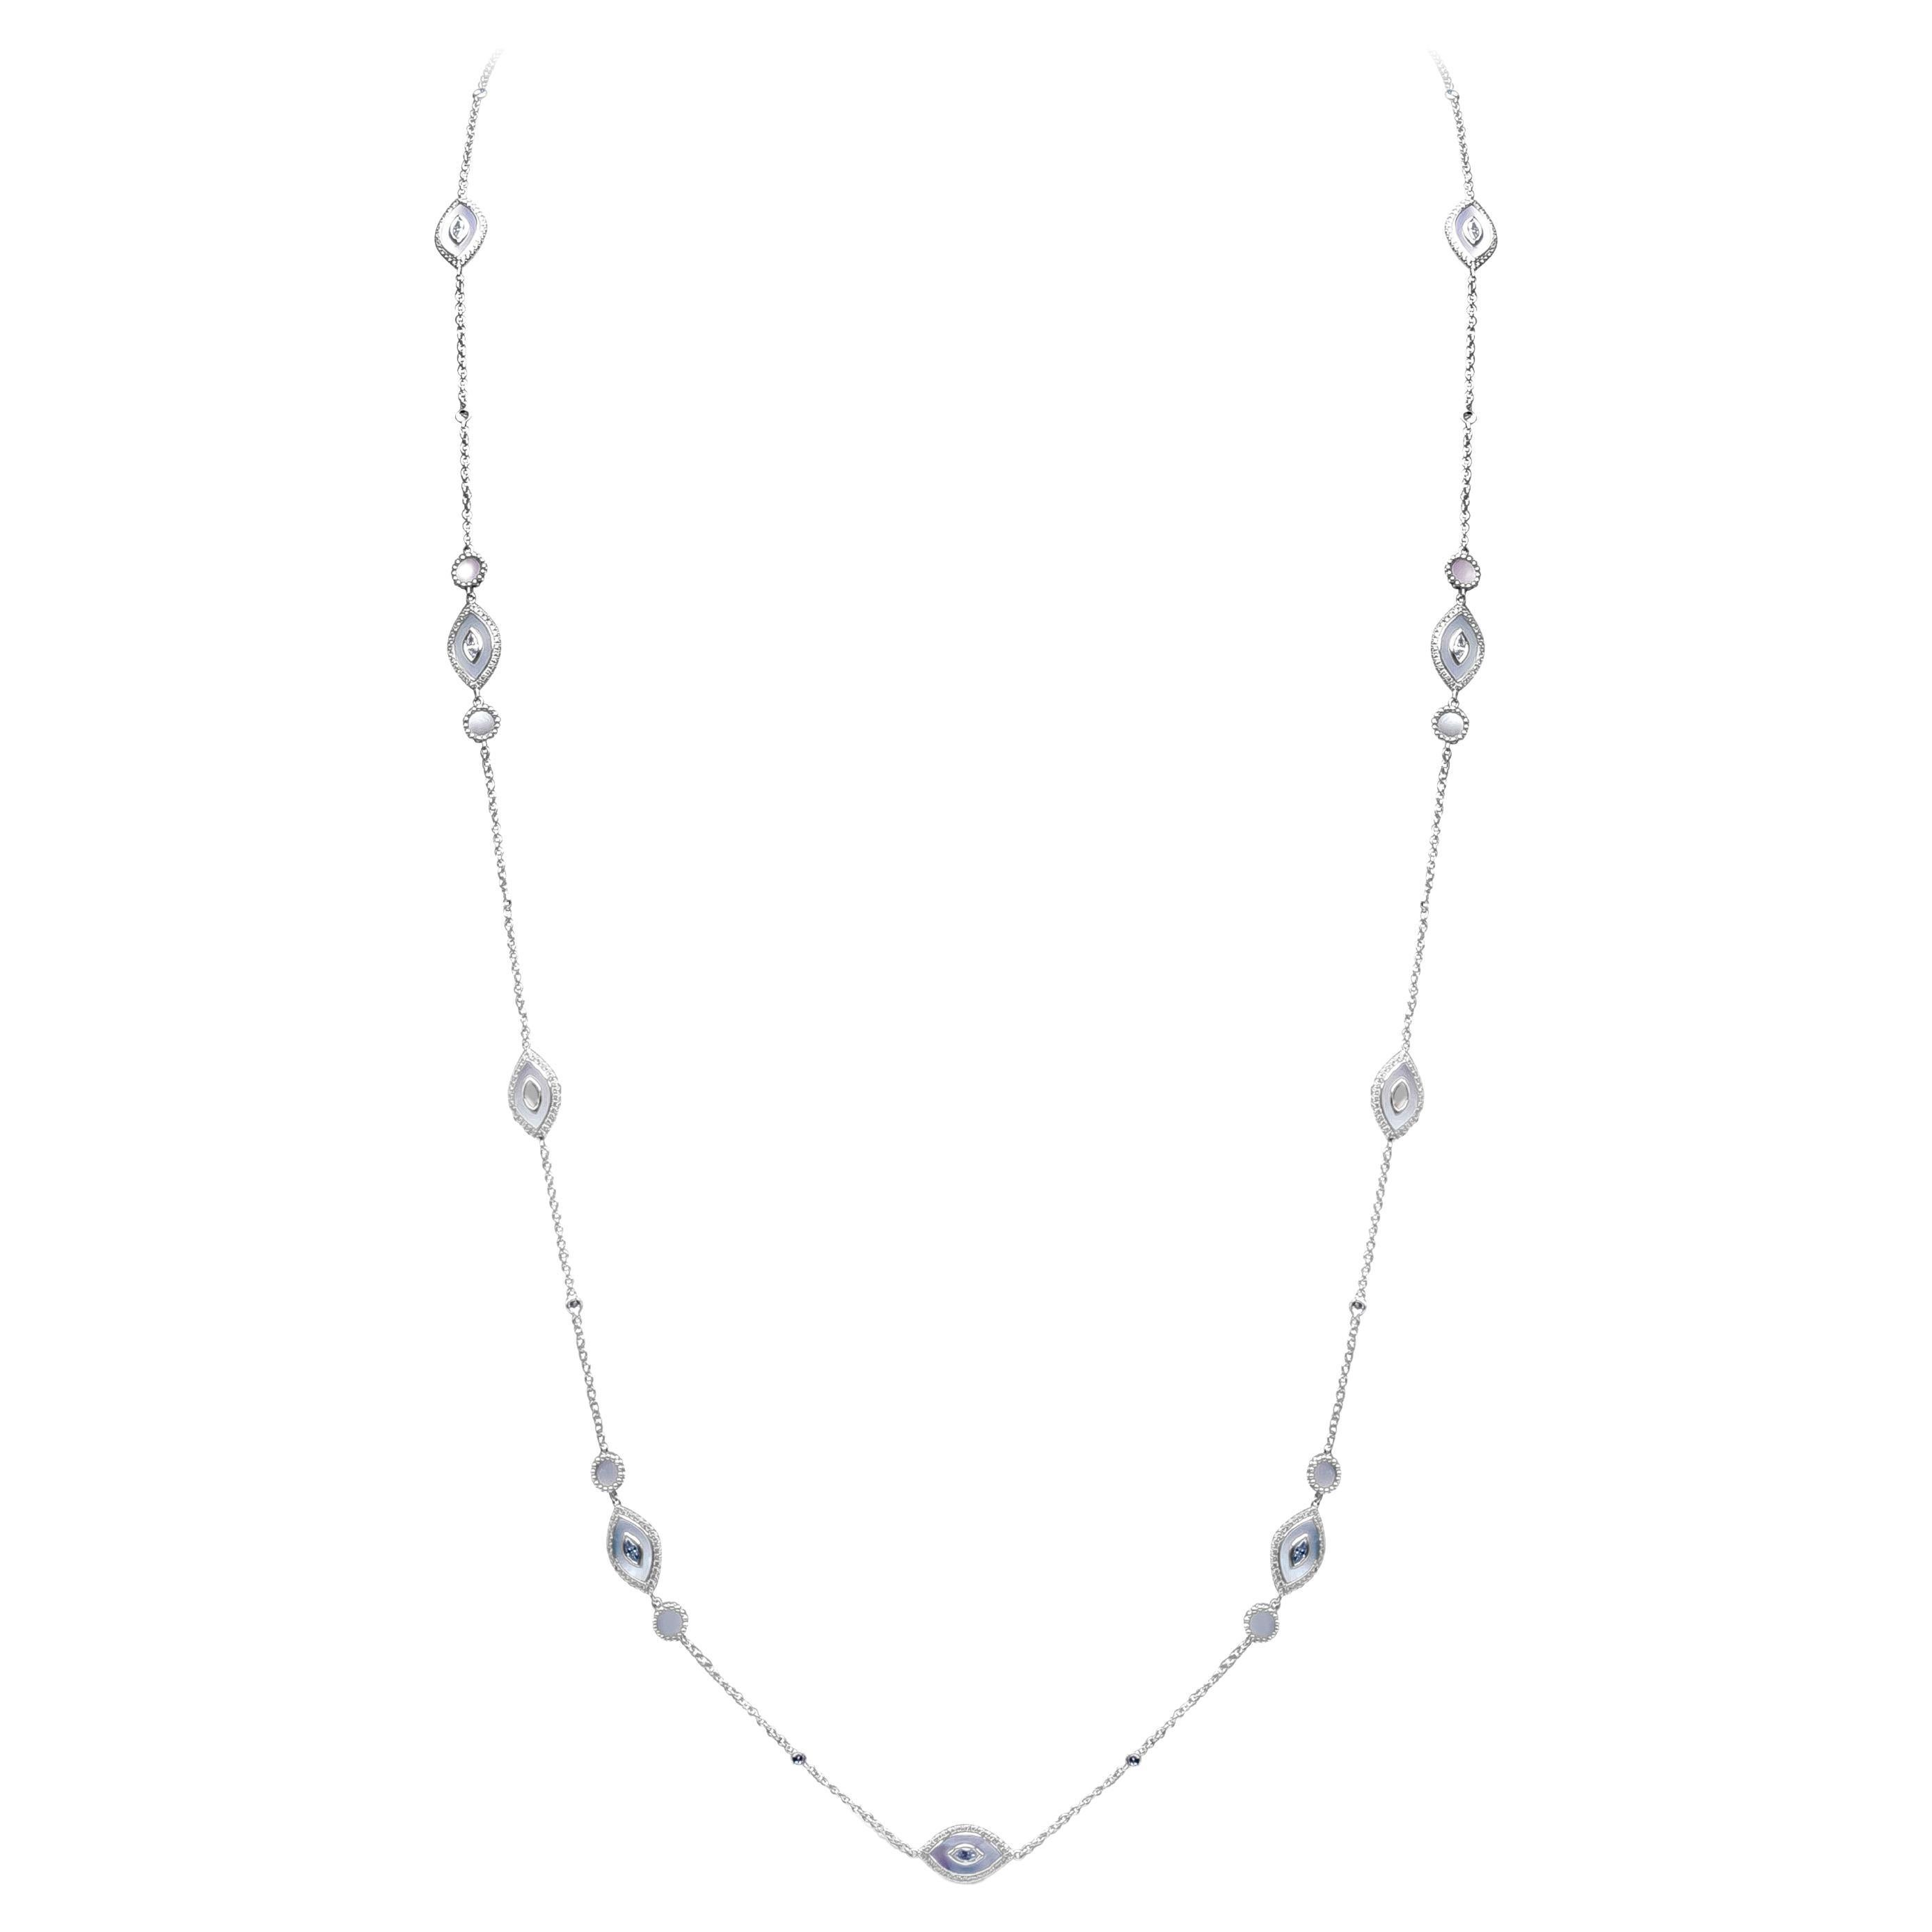 A fashionable long necklace showcasing diamond encrusted and mother of pearl in an evil eye design. Diamonds weigh 3.77 carats total. Made with 18K White Gold. 

Style available in different price ranges. Prices are based on your selection. Please